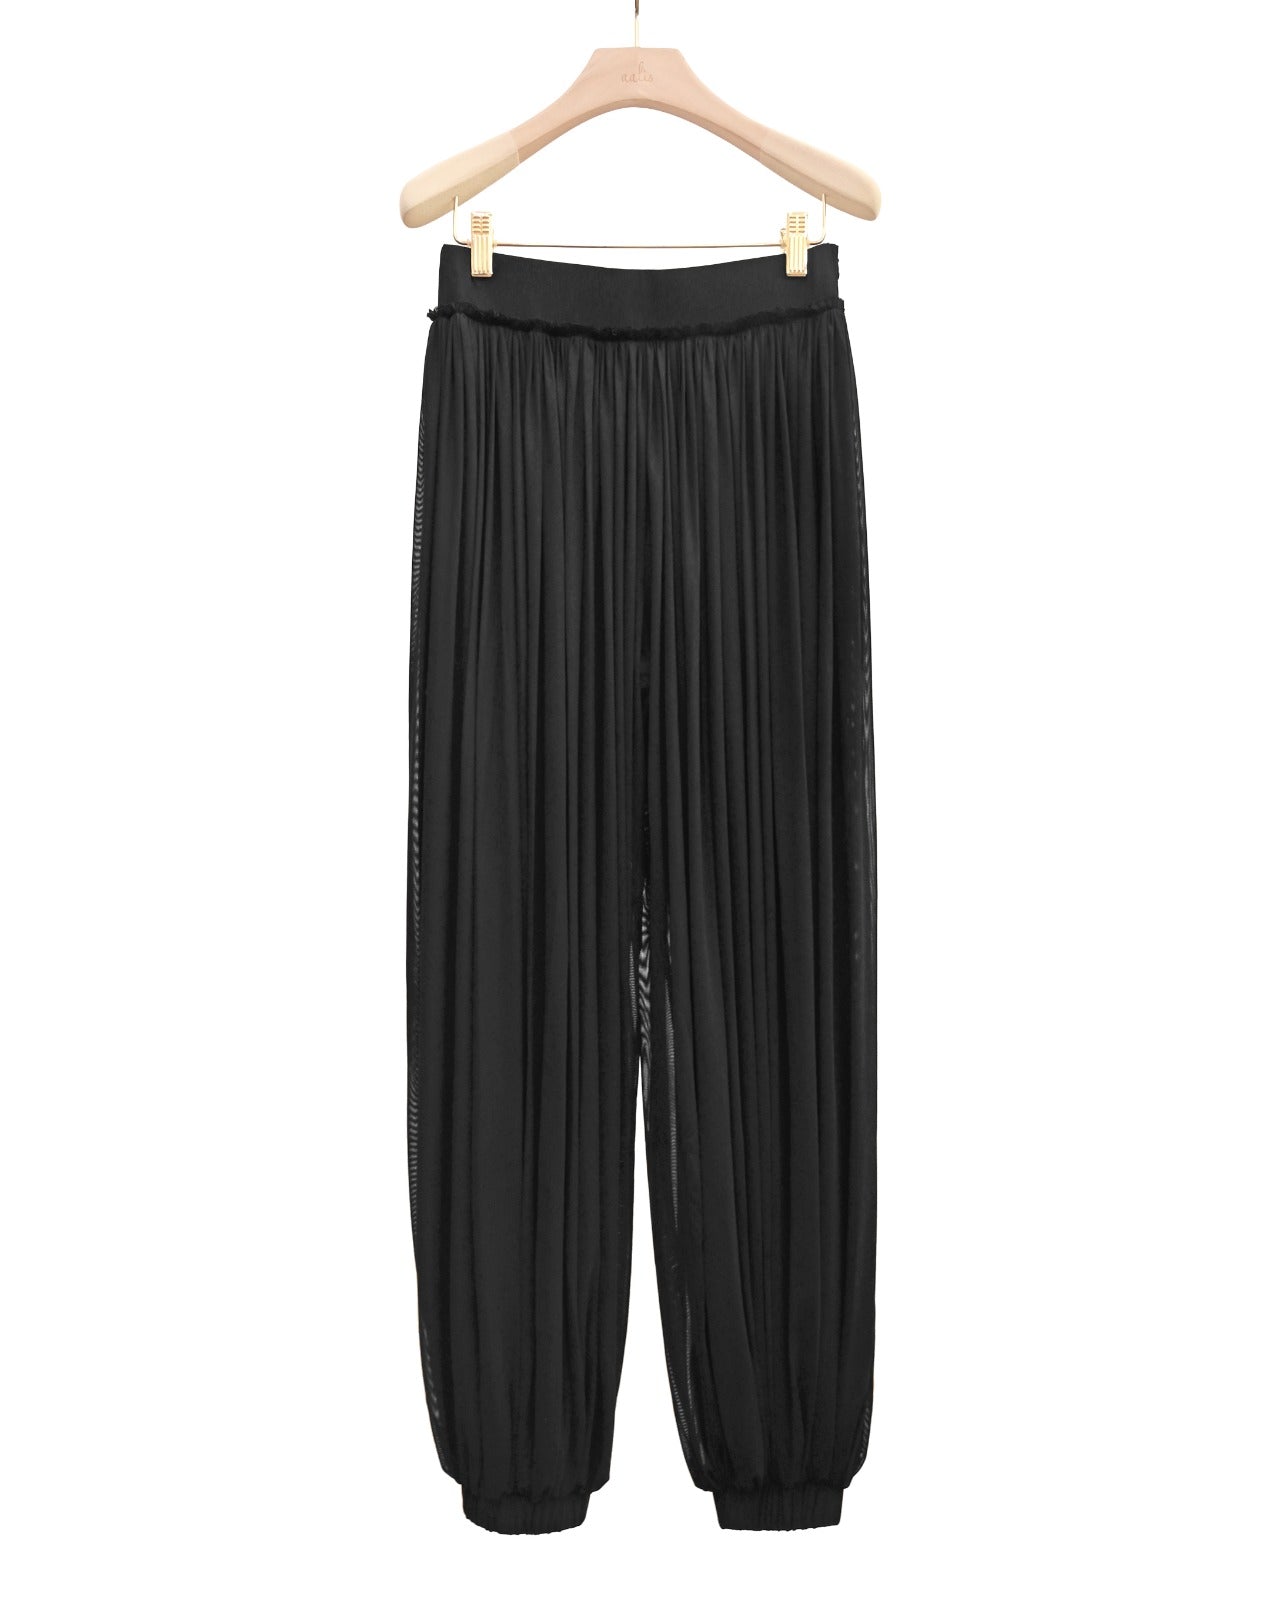 Buy Black Balloon Pants Women, Plus Size Drop Crotch Pants by Kotyto  Clothing Online in India - Etsy